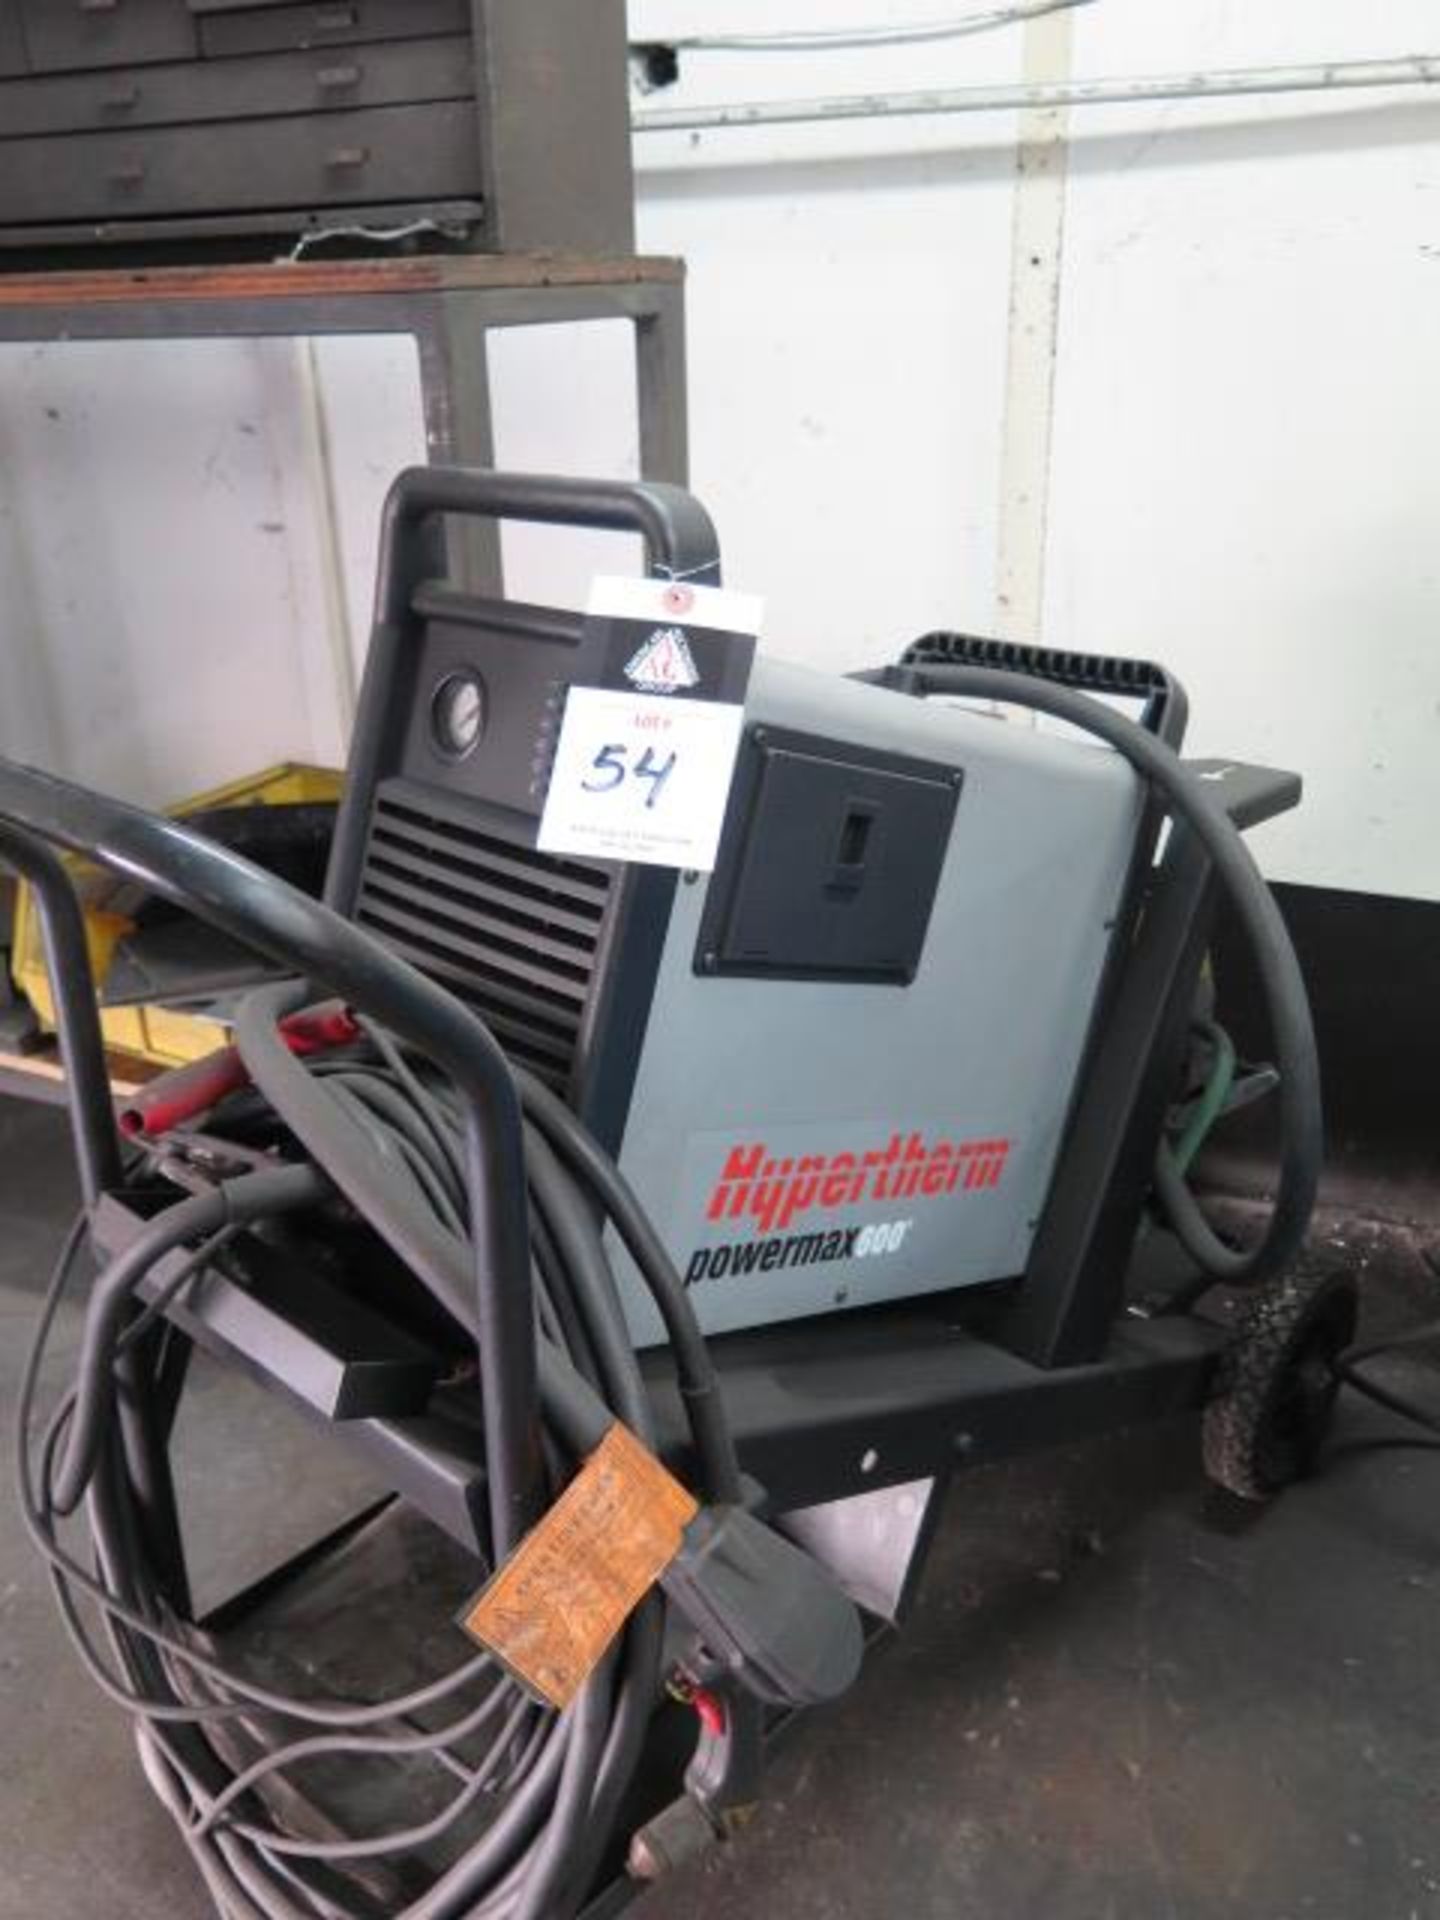 Hypertherm Powermax 600 Plasma Cutting Power Source w/ Cart (SOLD AS-IS - NO WARRANTY) - Image 3 of 9